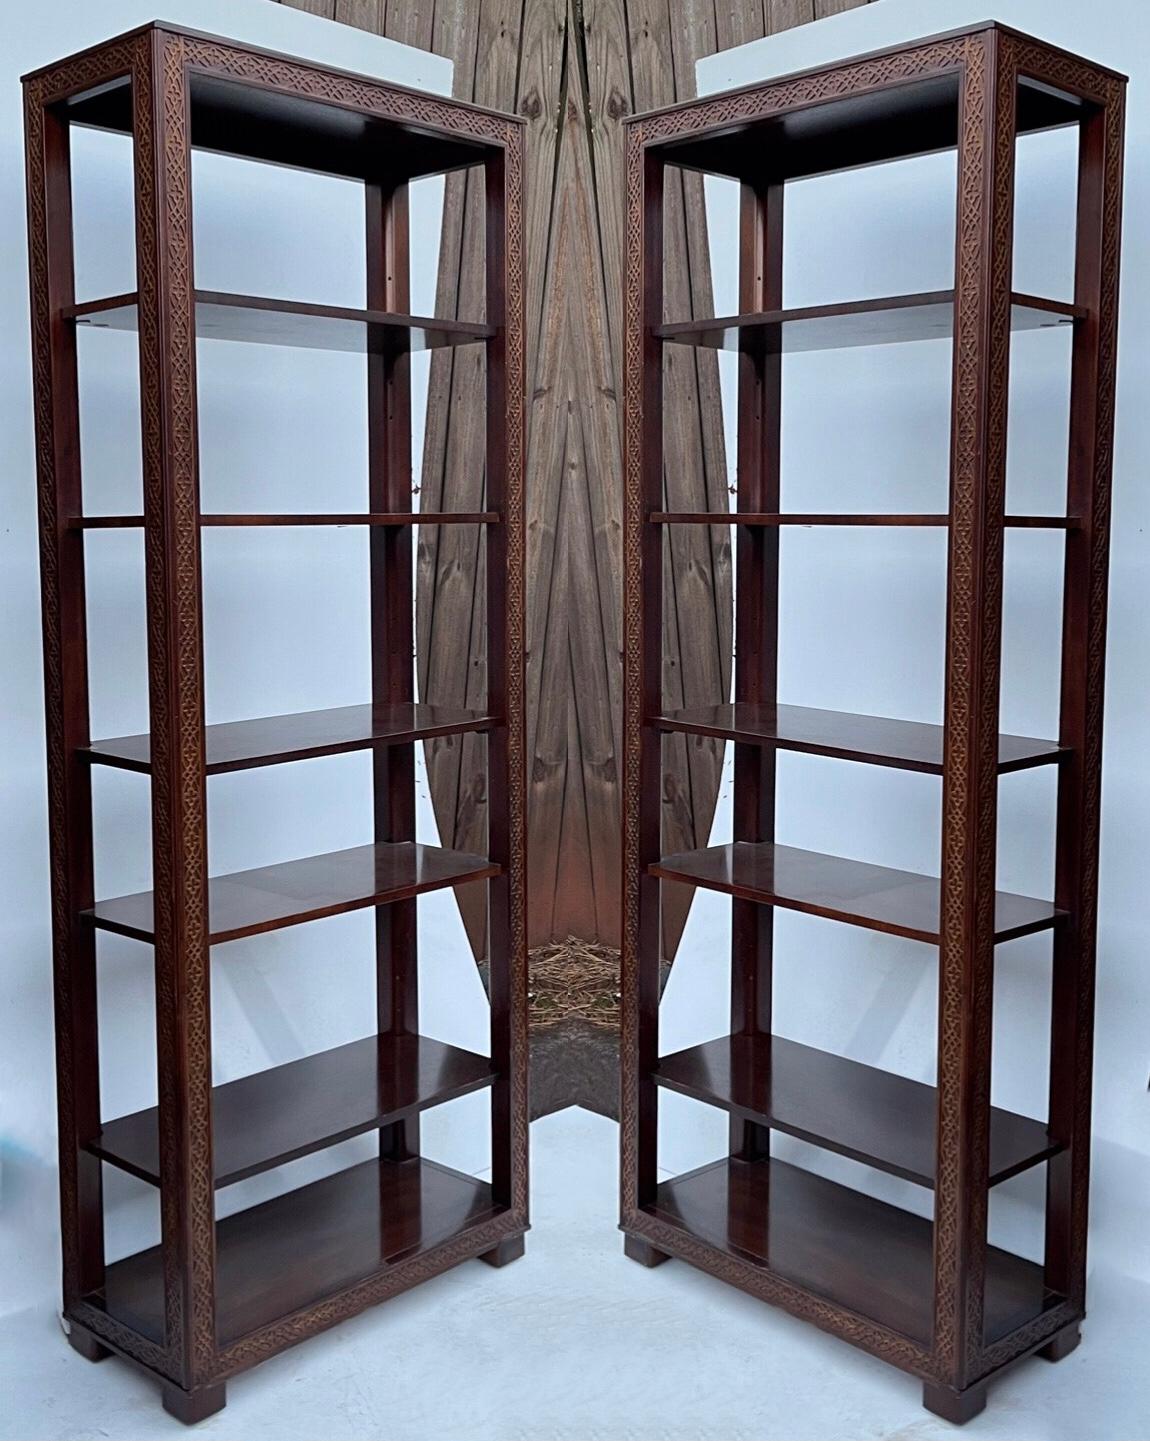 This is a wonderful pair of Chinese chippendale style carved mahogany etageres or shelves. Note the frettework running down the frame. One half of the shelves are fixed, and the others are adjustable. These are classic pieces that are hard to find!